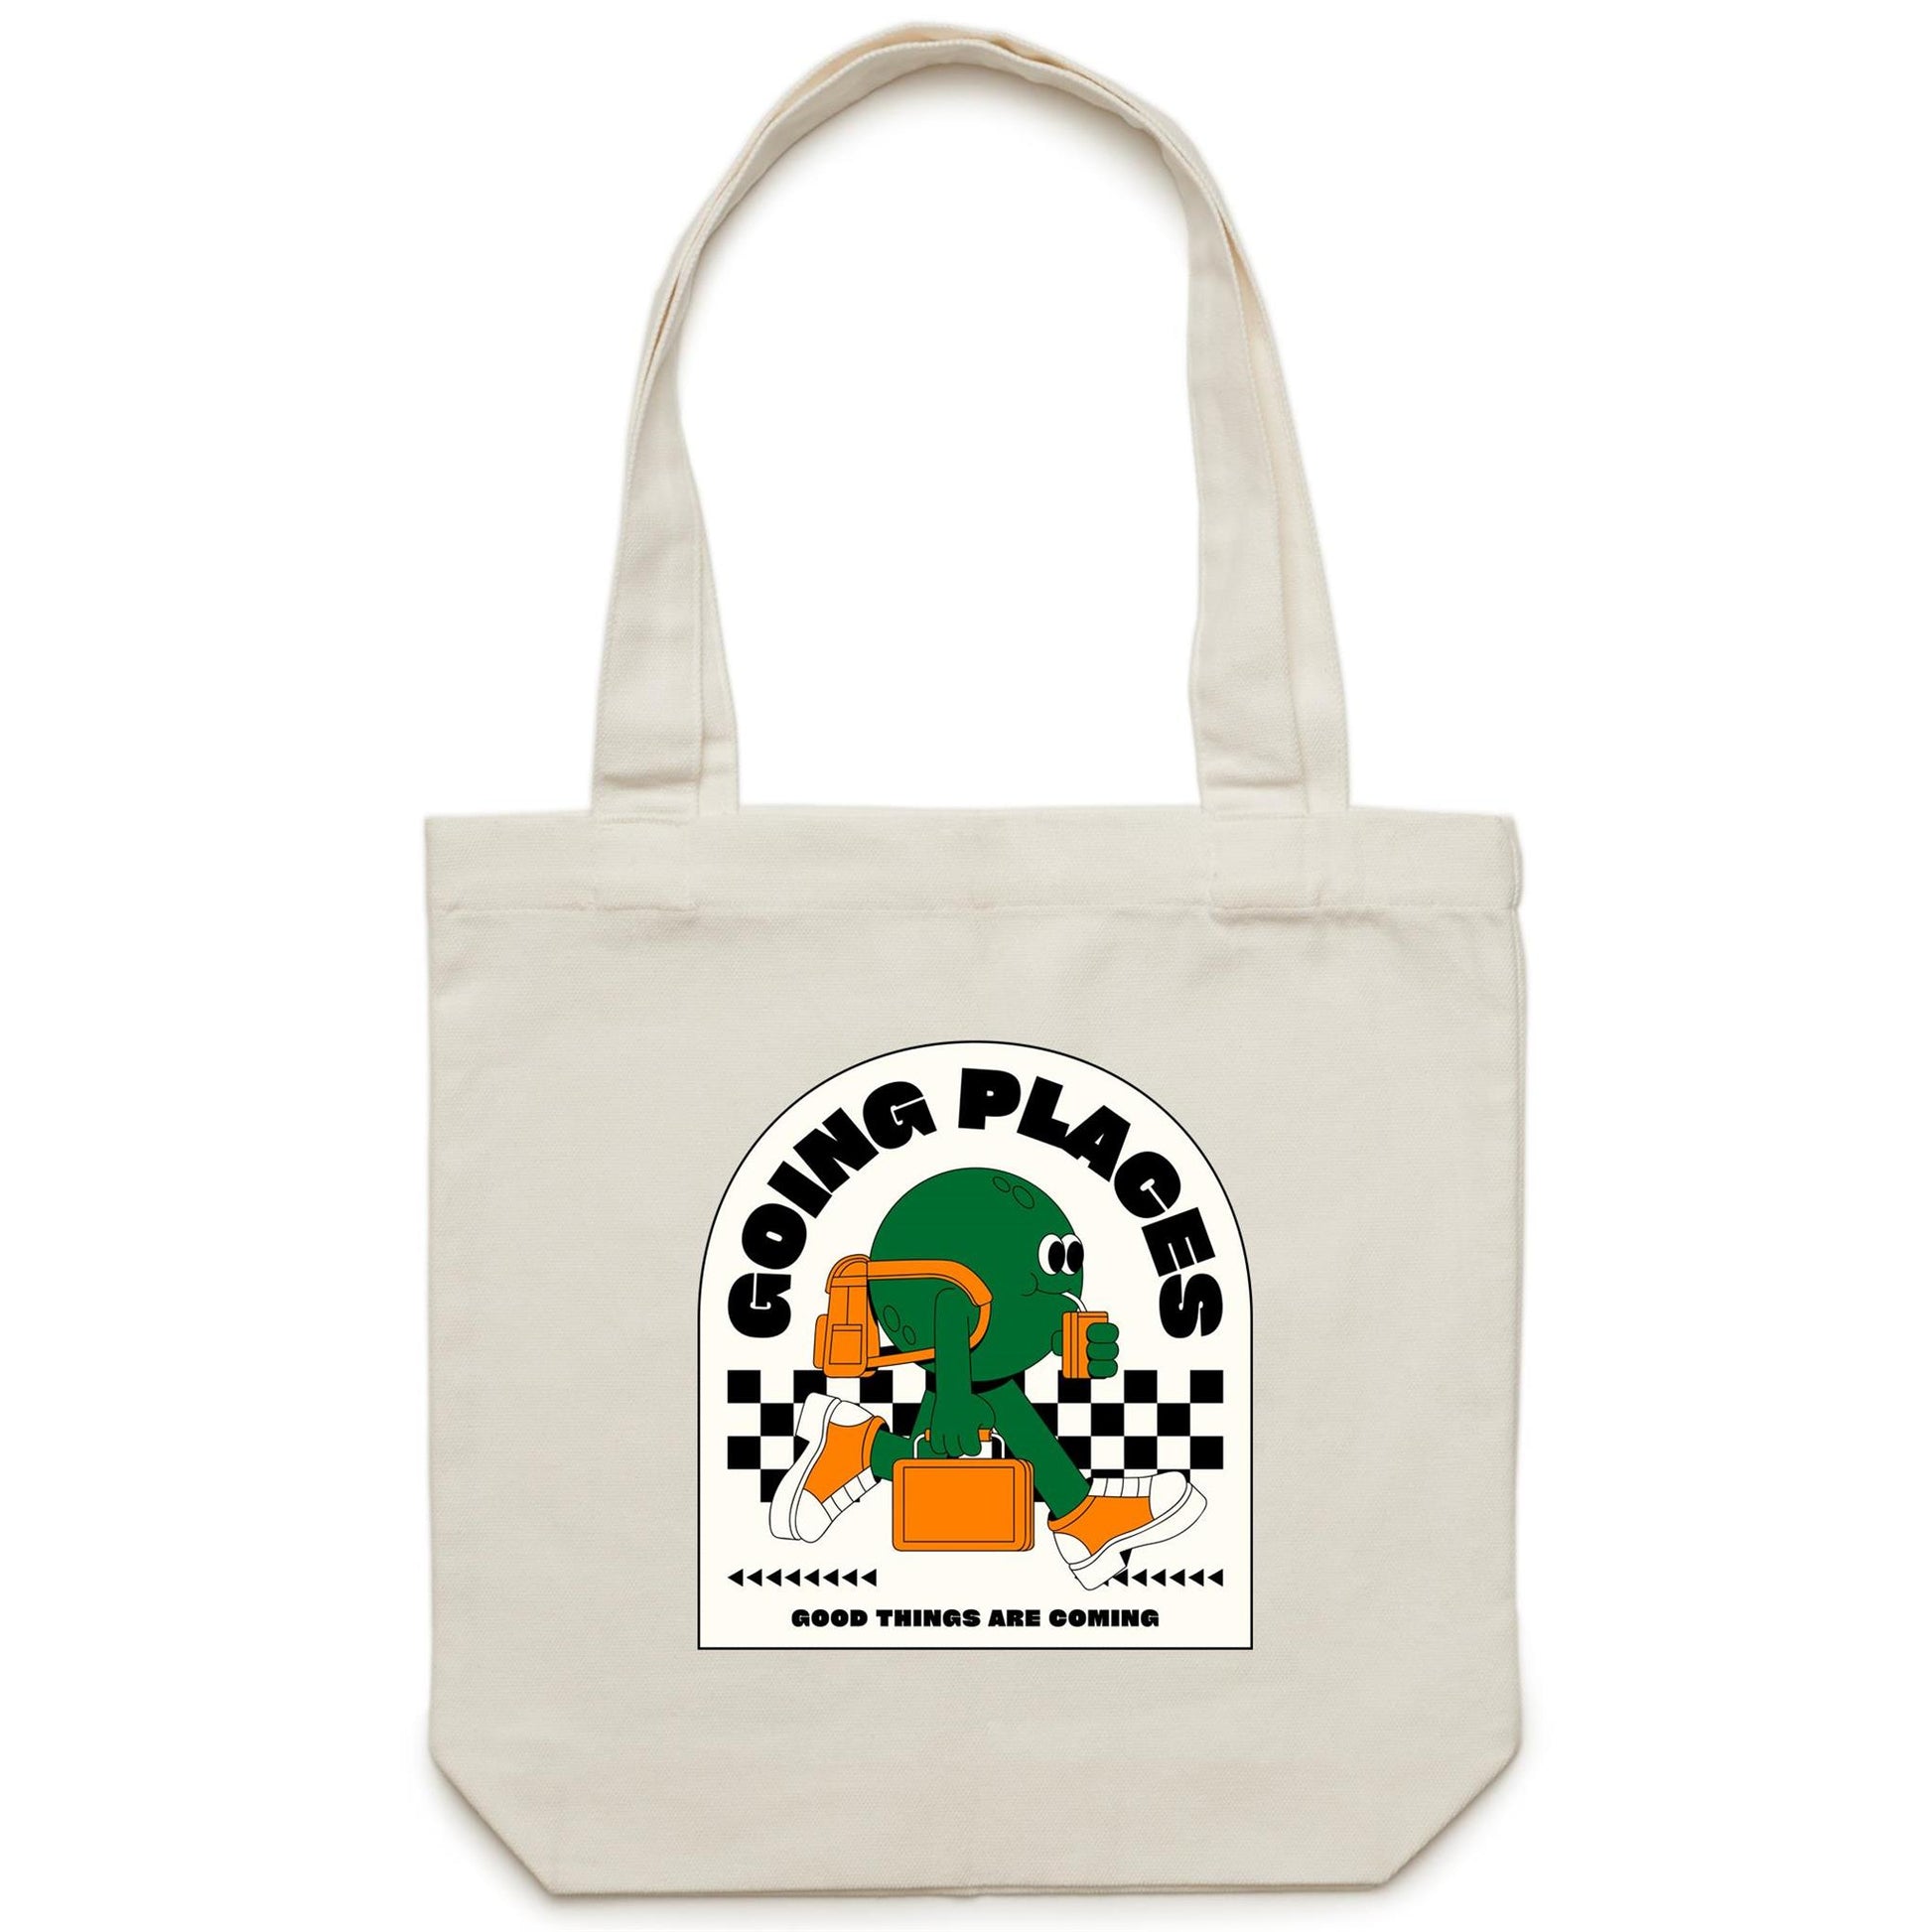 Going Places - Canvas Tote Bag Cream One Size Tote Bag Retro